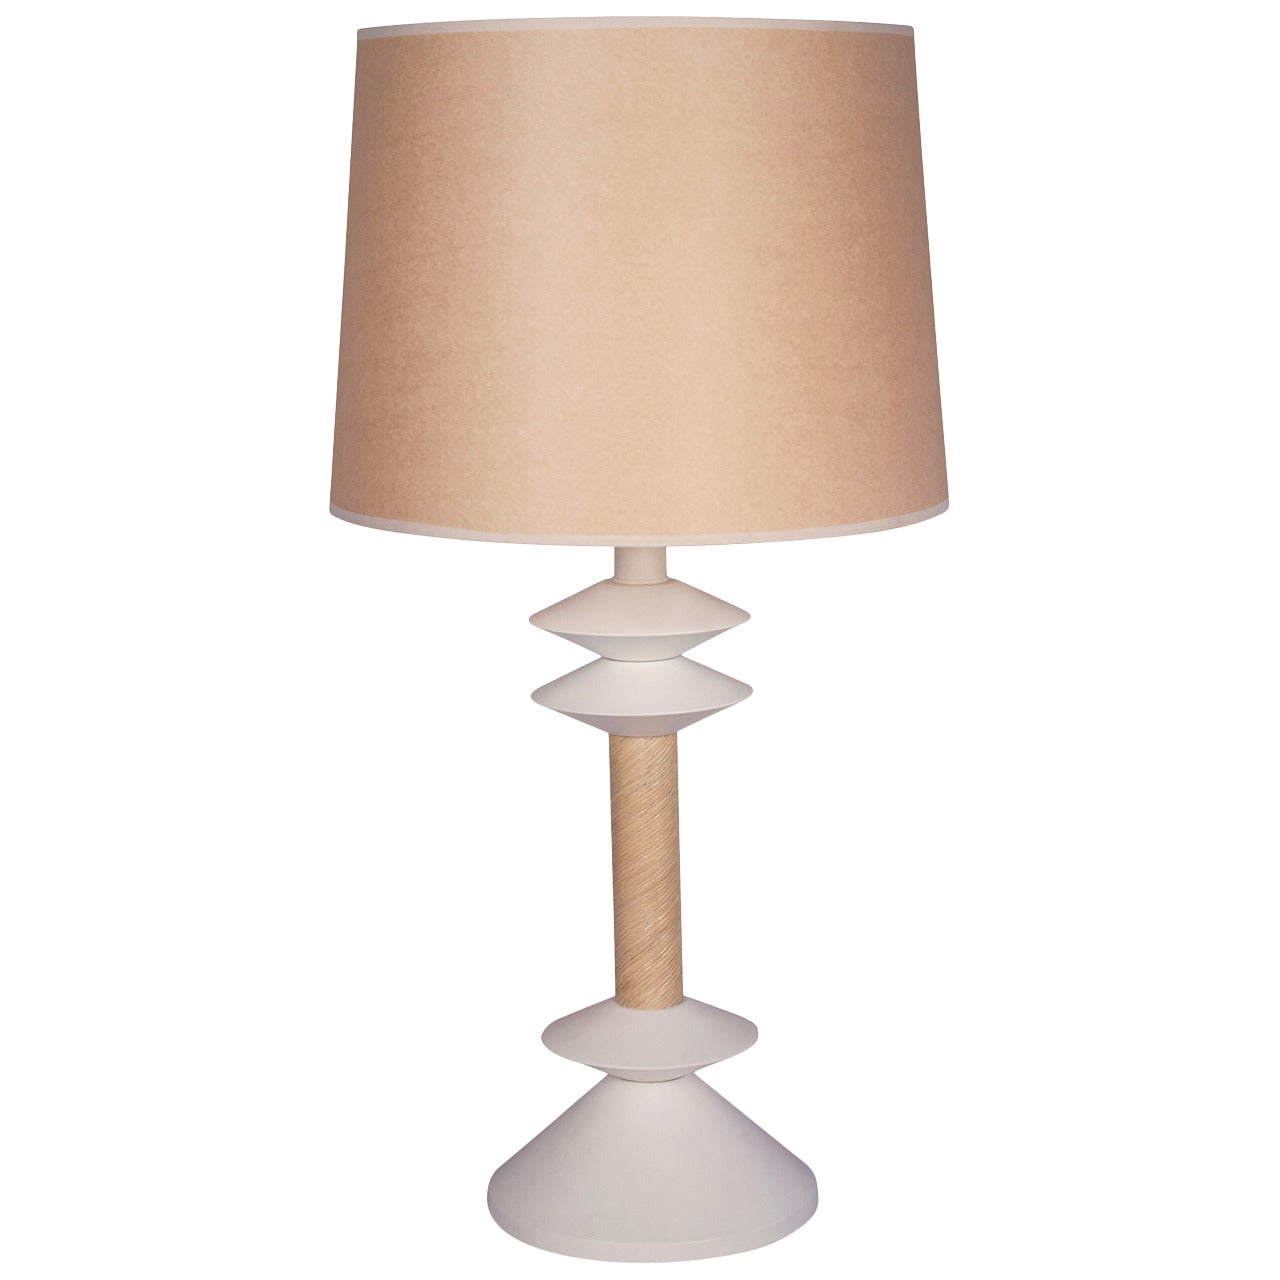 Jay Spectre Table Lamp For Sale